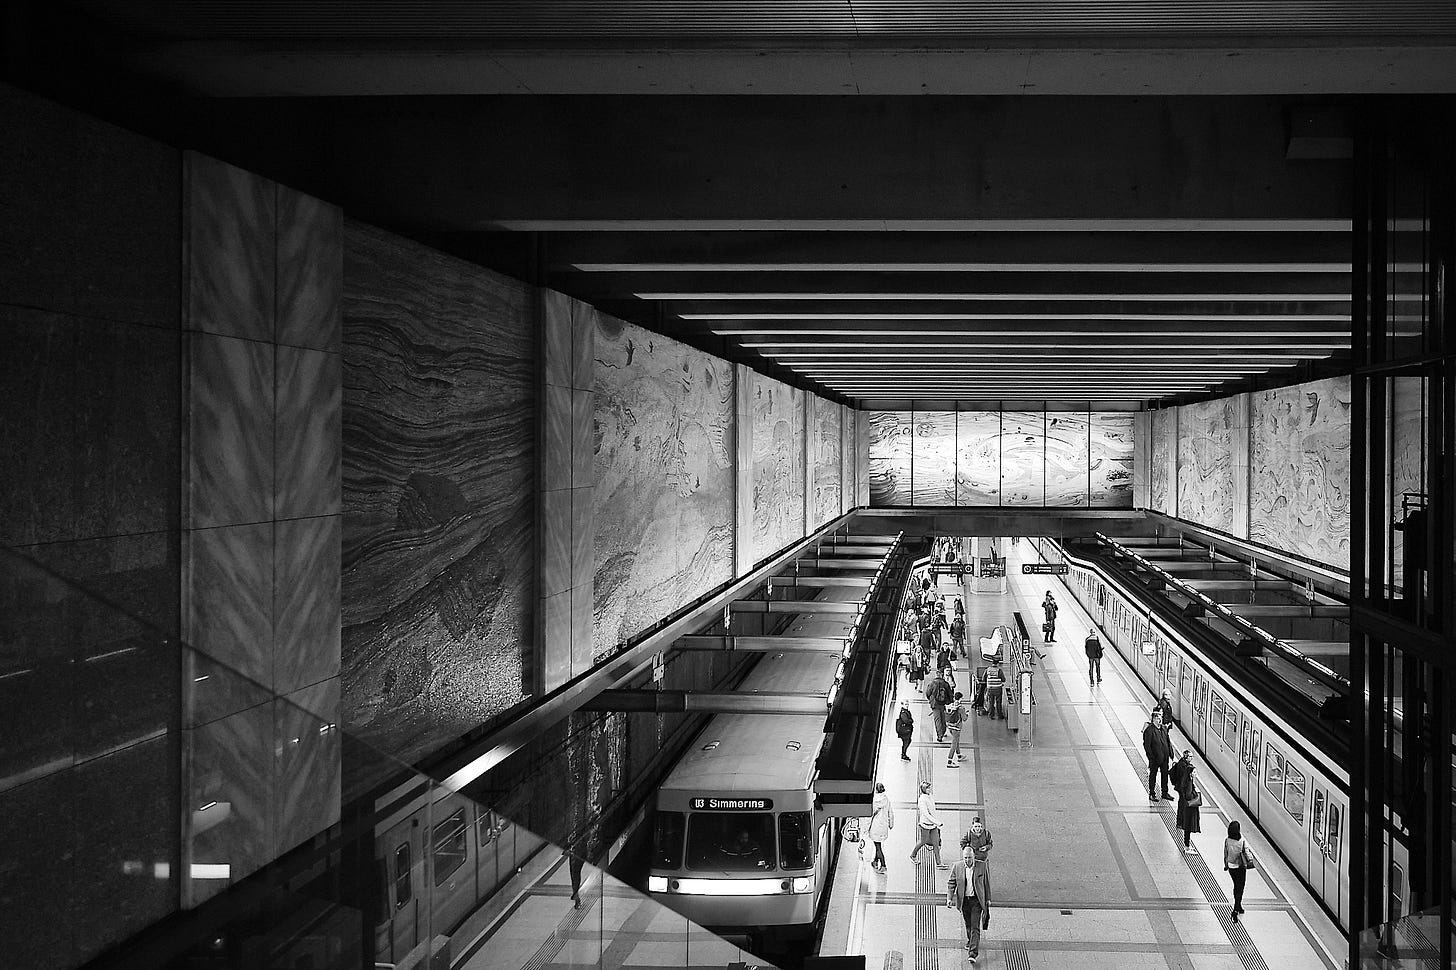 Black and white photograph of the Volkstheater U3 subway station in Vienna. The station features a modern design with sleek lines, a marble-patterned wall on the far side, and a clean platform with passengers waiting. A subway train marked 'U3 Simmering' is stationary on the track closest to the camera, with its doors closed. Overhead strip lighting illuminates the station, and the platform is accessible via escalators and stairs.